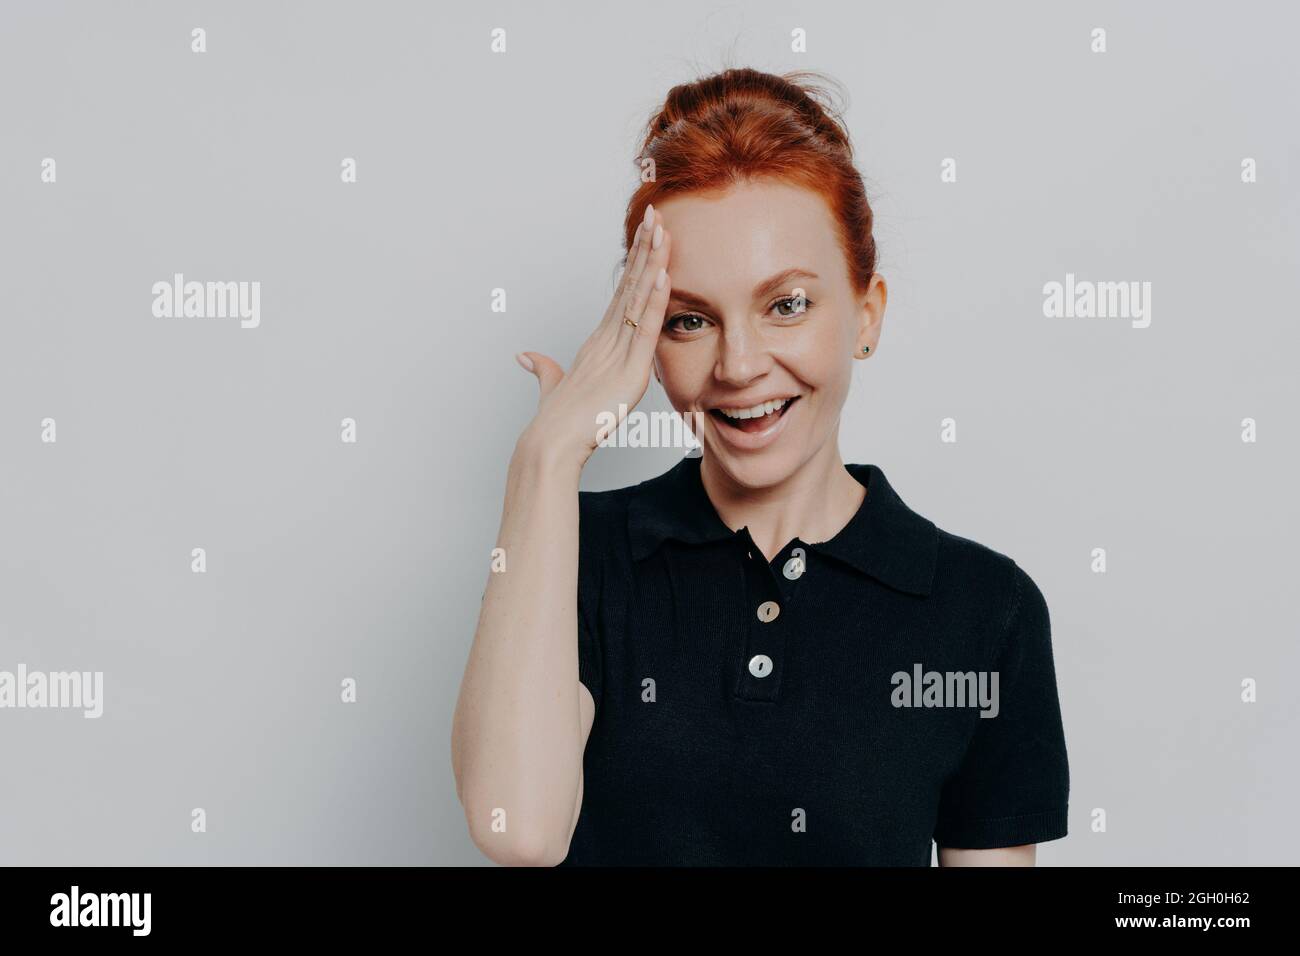 Pretty red-haired woman with hair in bun forgetting something, isolated on grey background Stock Photo